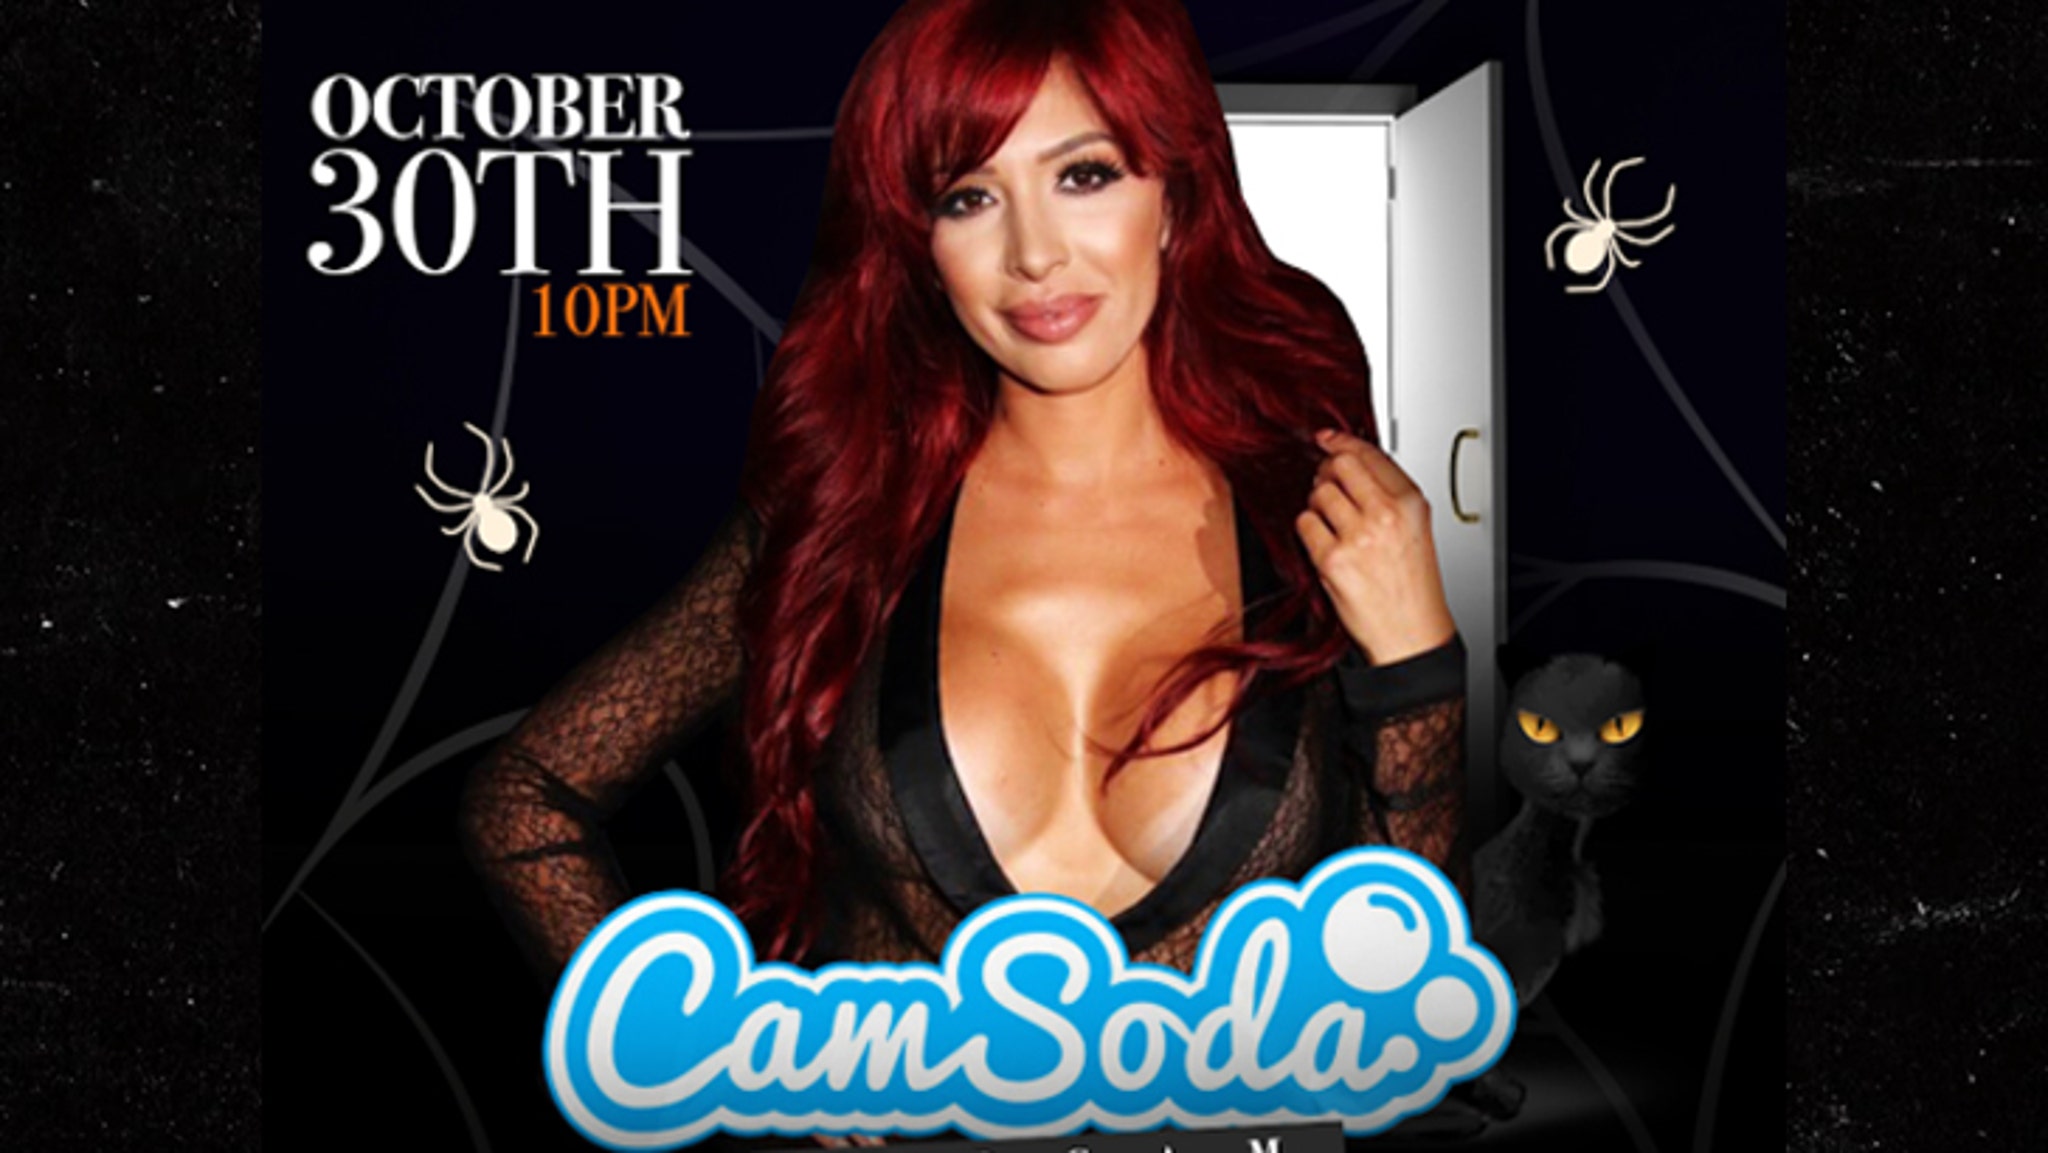 Farrah Abraham Performing Anal For Porn Site For Halloween